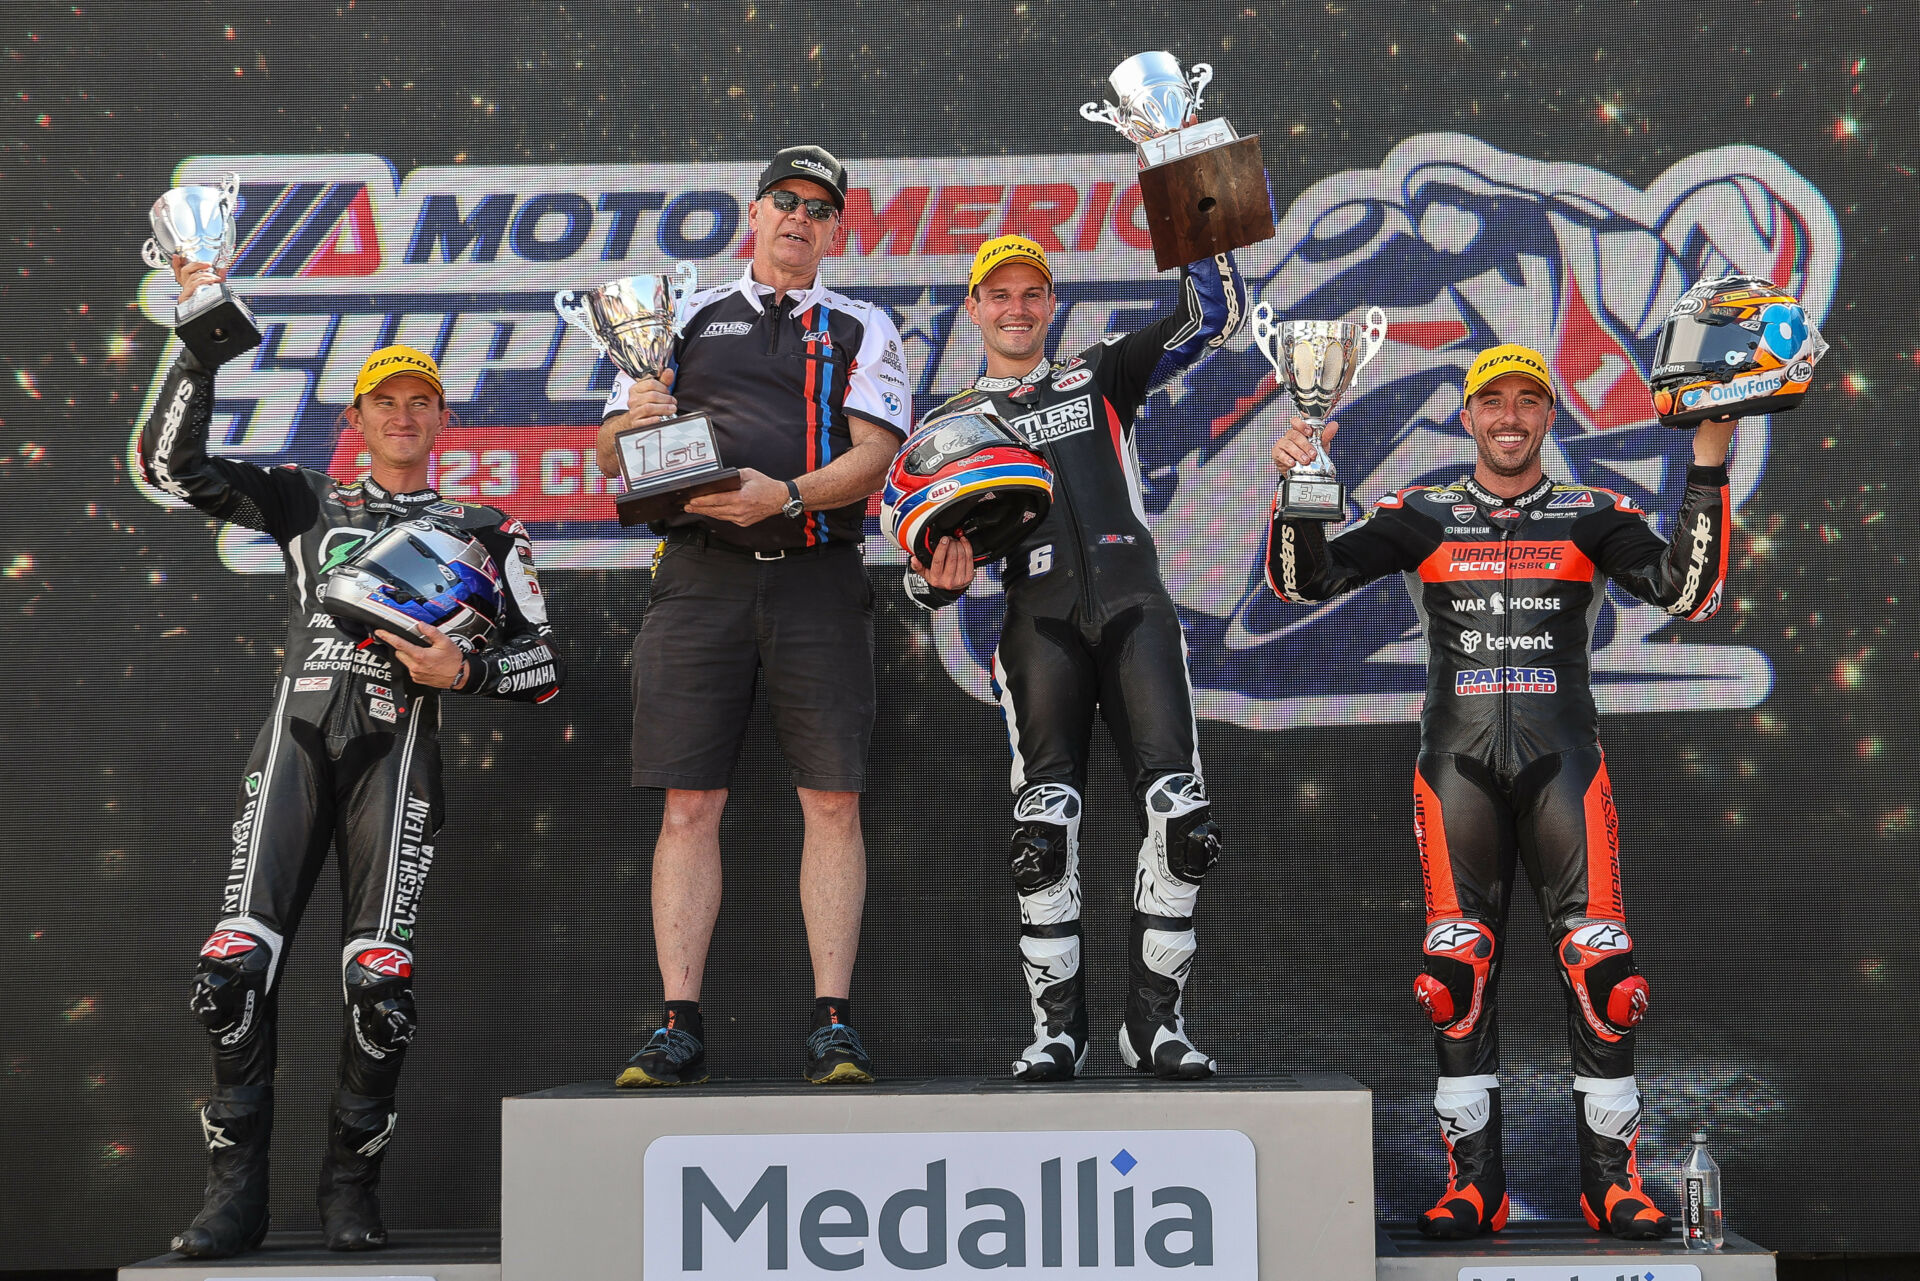 Medallia is continuing its title sponsorship of the 2023 MotoAmerica Medallia Superbike Championship. Here, Road Atlanta Race One winner shares the podium with his Crew Chief Dave Weaver, runner-up Jake Gagne (left) and third-place finisher Josh Herrin (right). Photo by Brian J. Nelson.